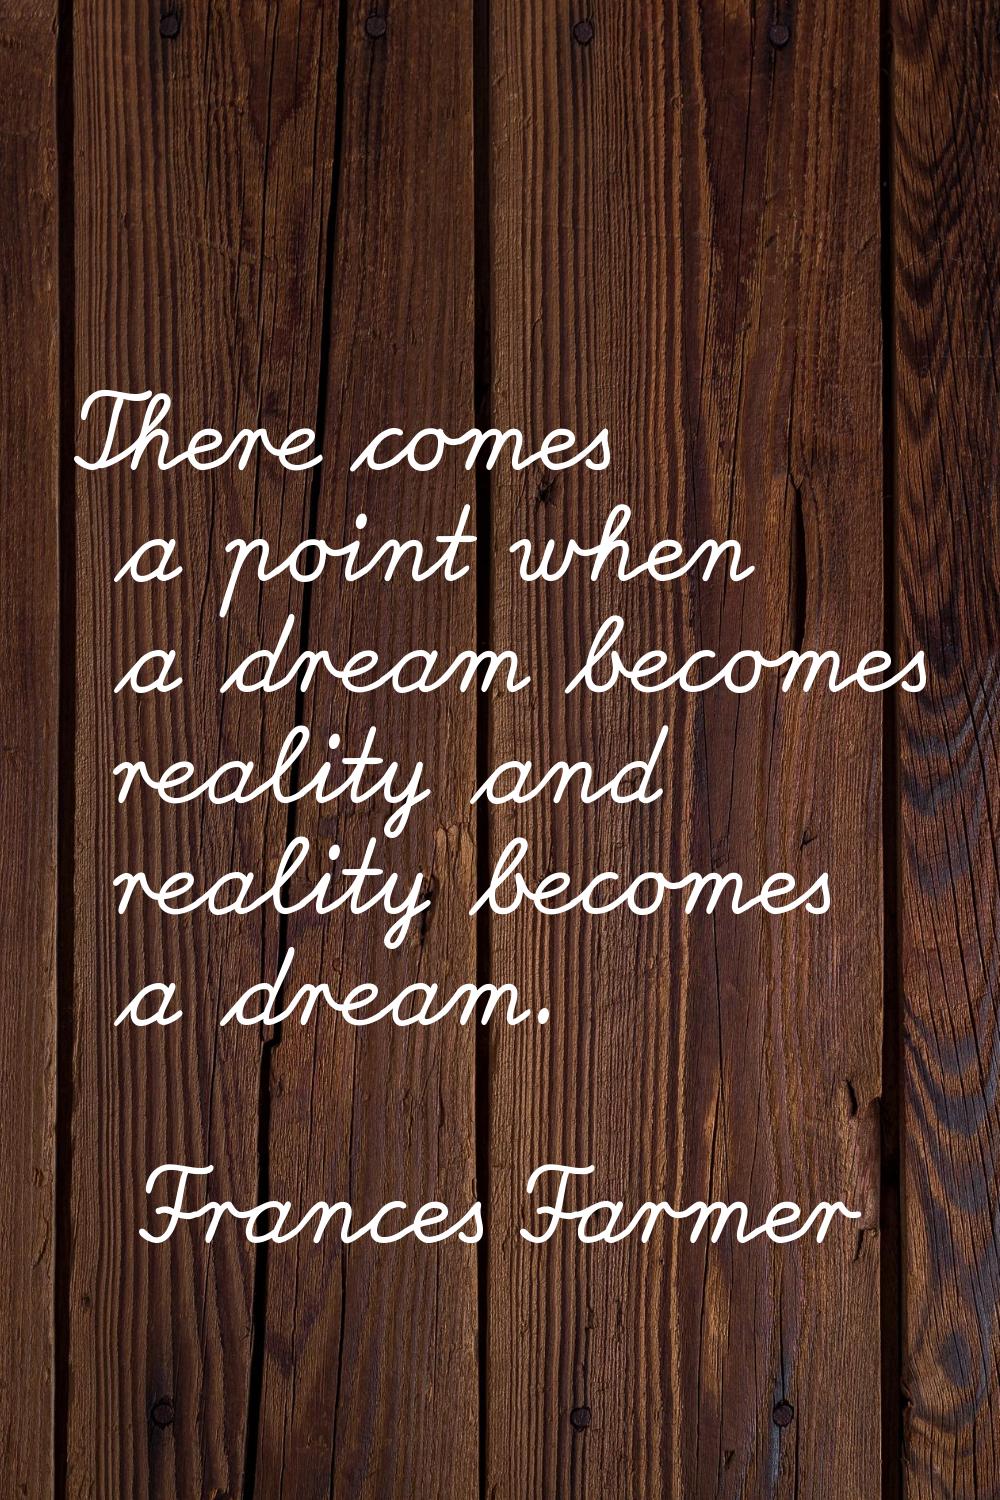 There comes a point when a dream becomes reality and reality becomes a dream.